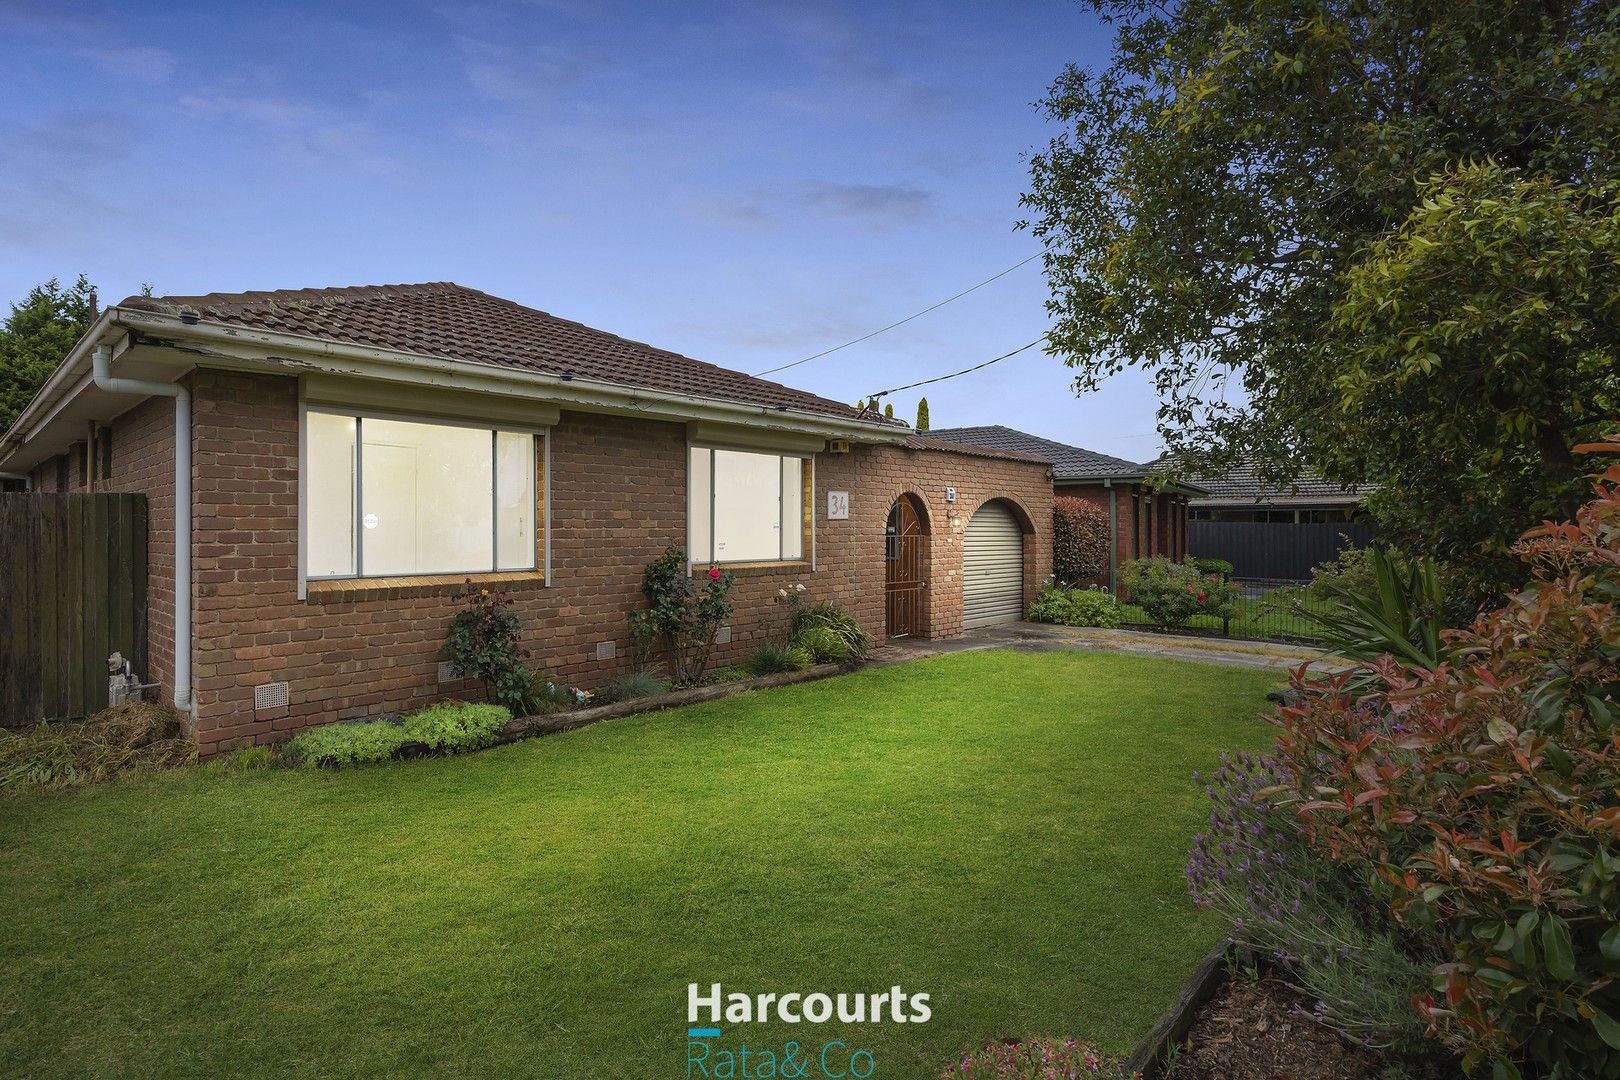 4 bedrooms House in 34 Savannah Crescent EPPING VIC, 3076